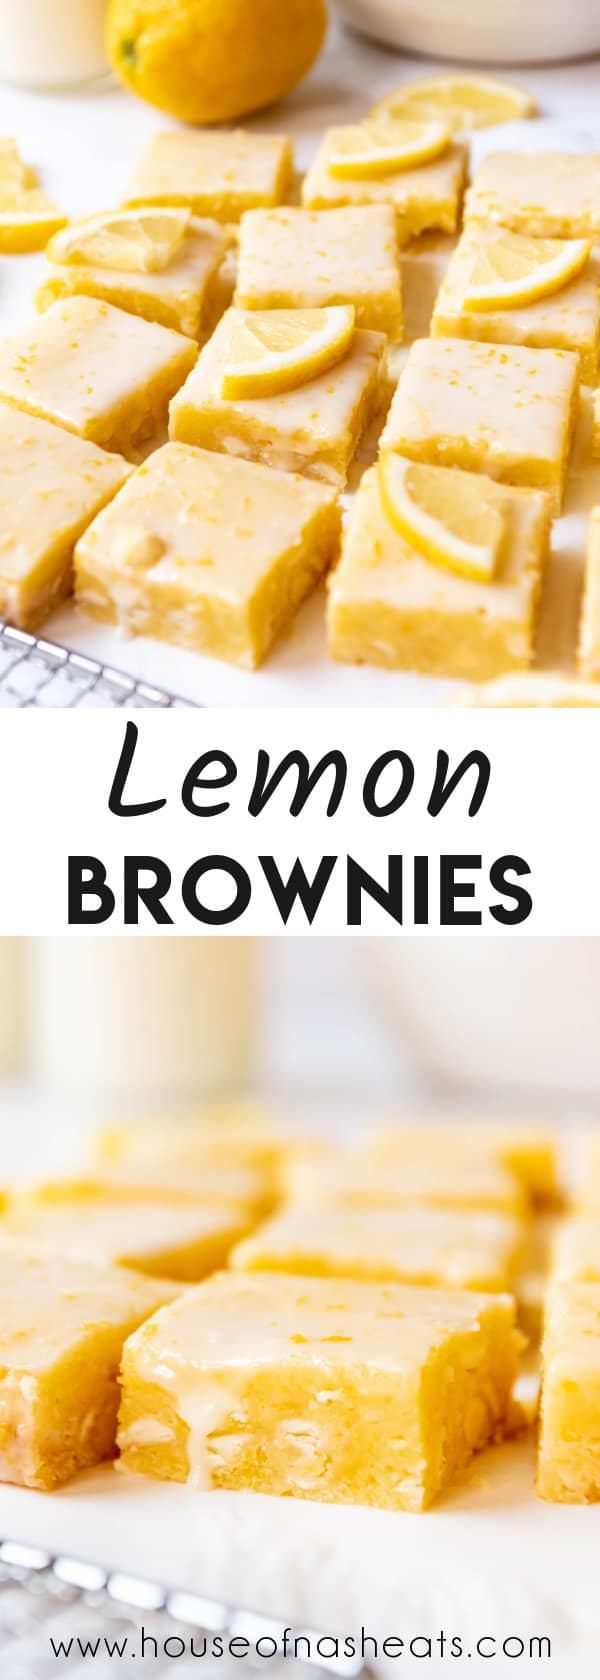 A collage of images of lemon brownies with text overlay.